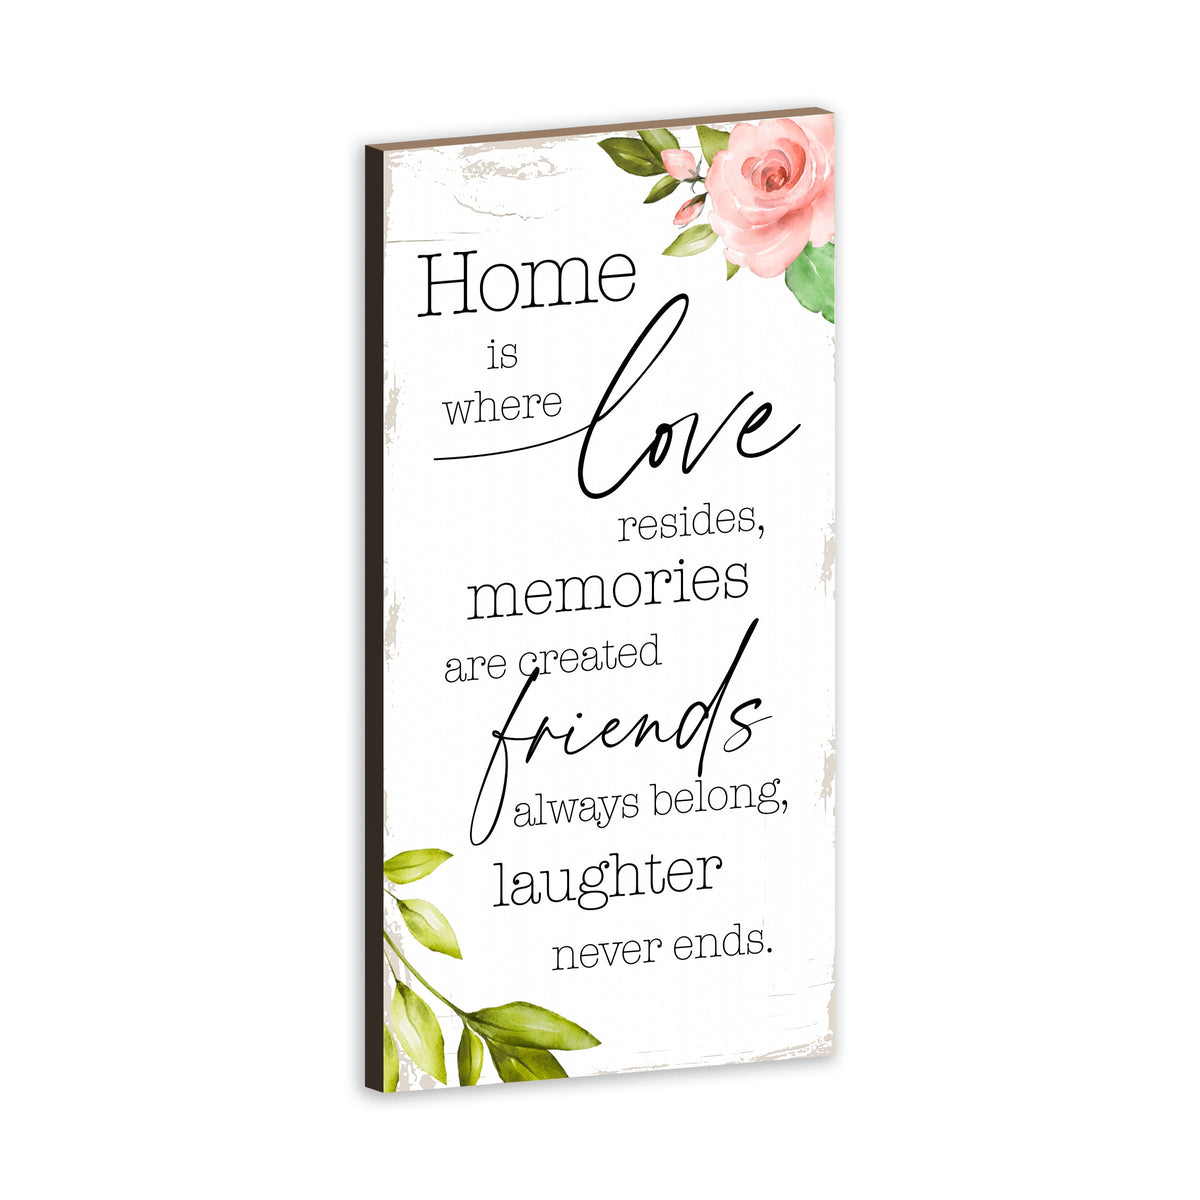 Lifesong Milestones Wooden Family Wall Plaque for Home Decorations: A Beautiful Wall Sign for Home Décor